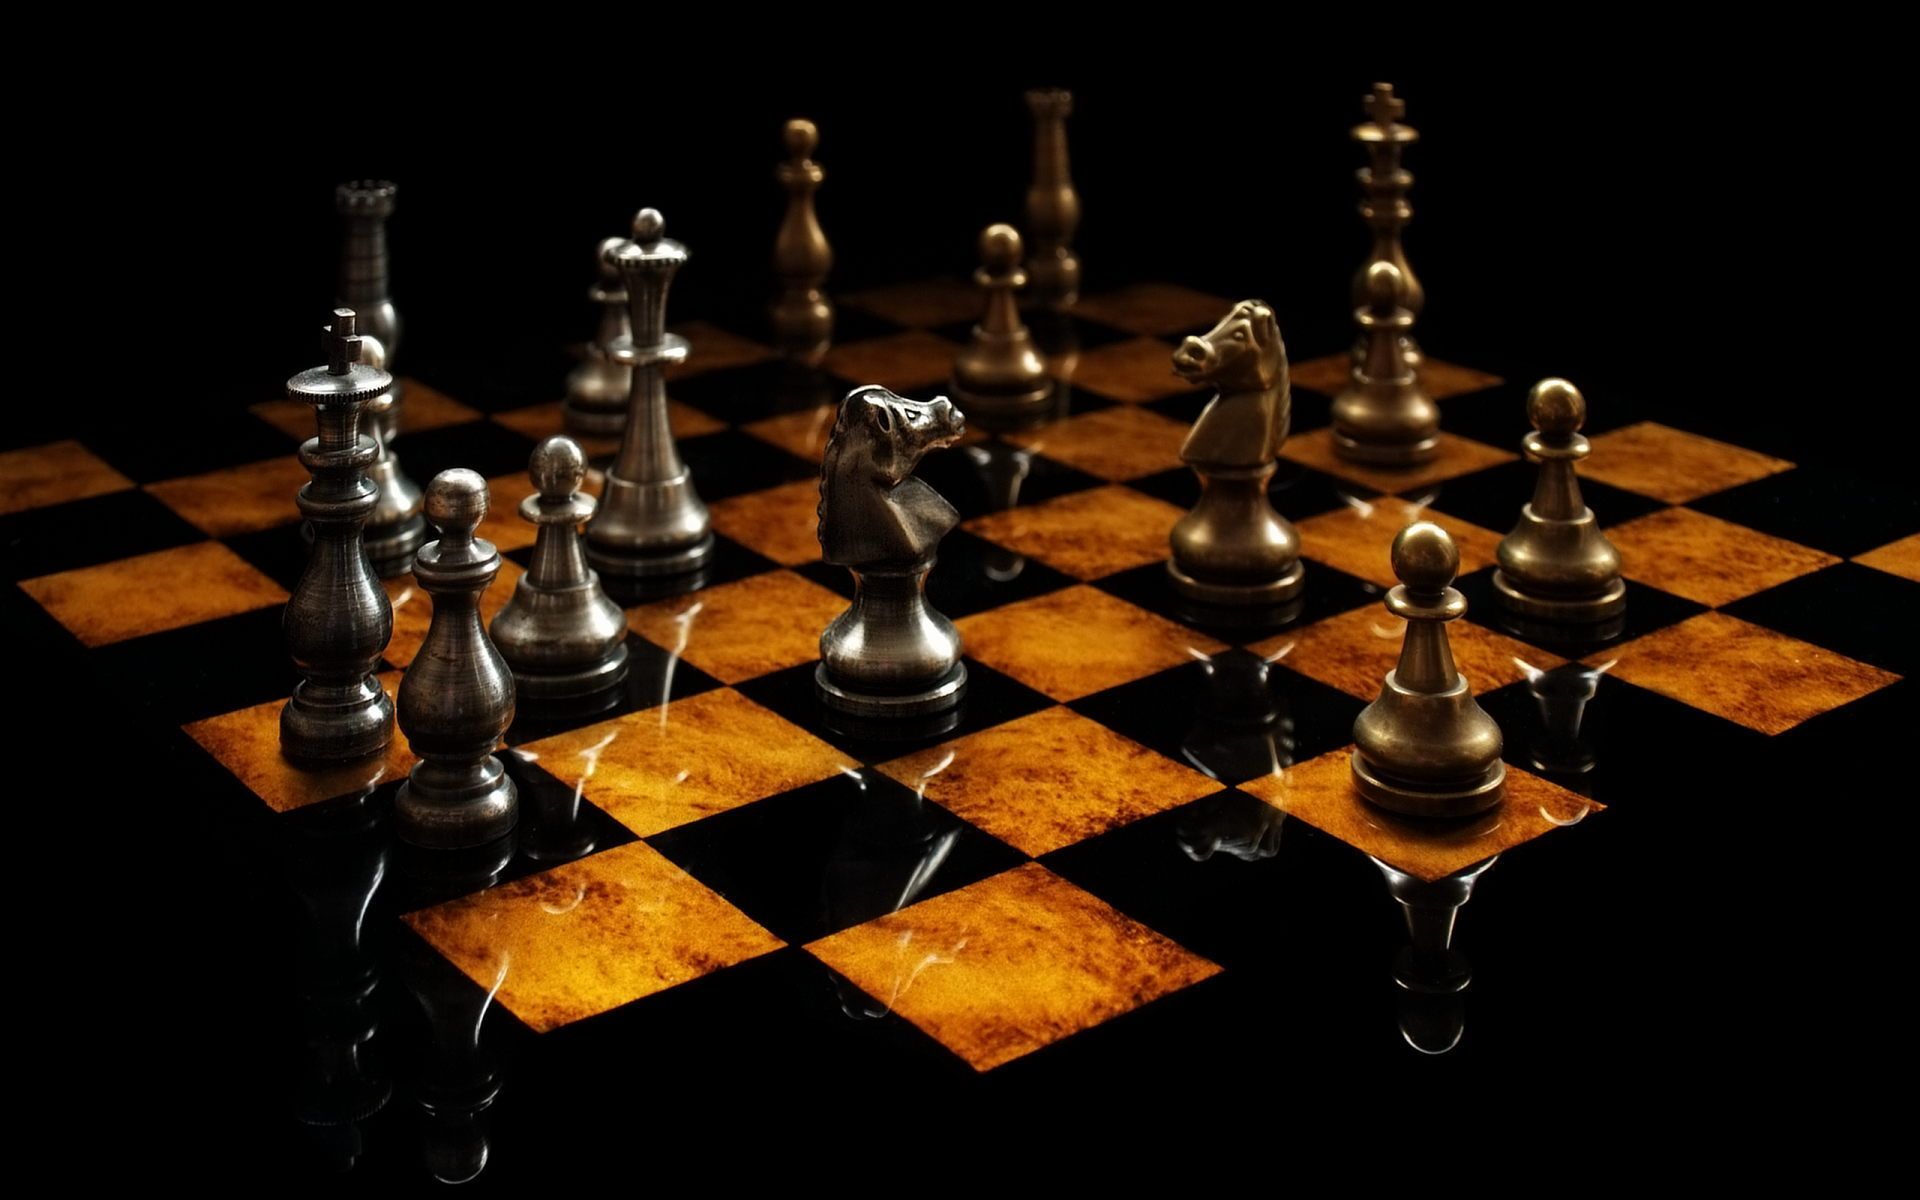 3d chess wallpaper,indoor games and sports,board game,chessboard,games,chess